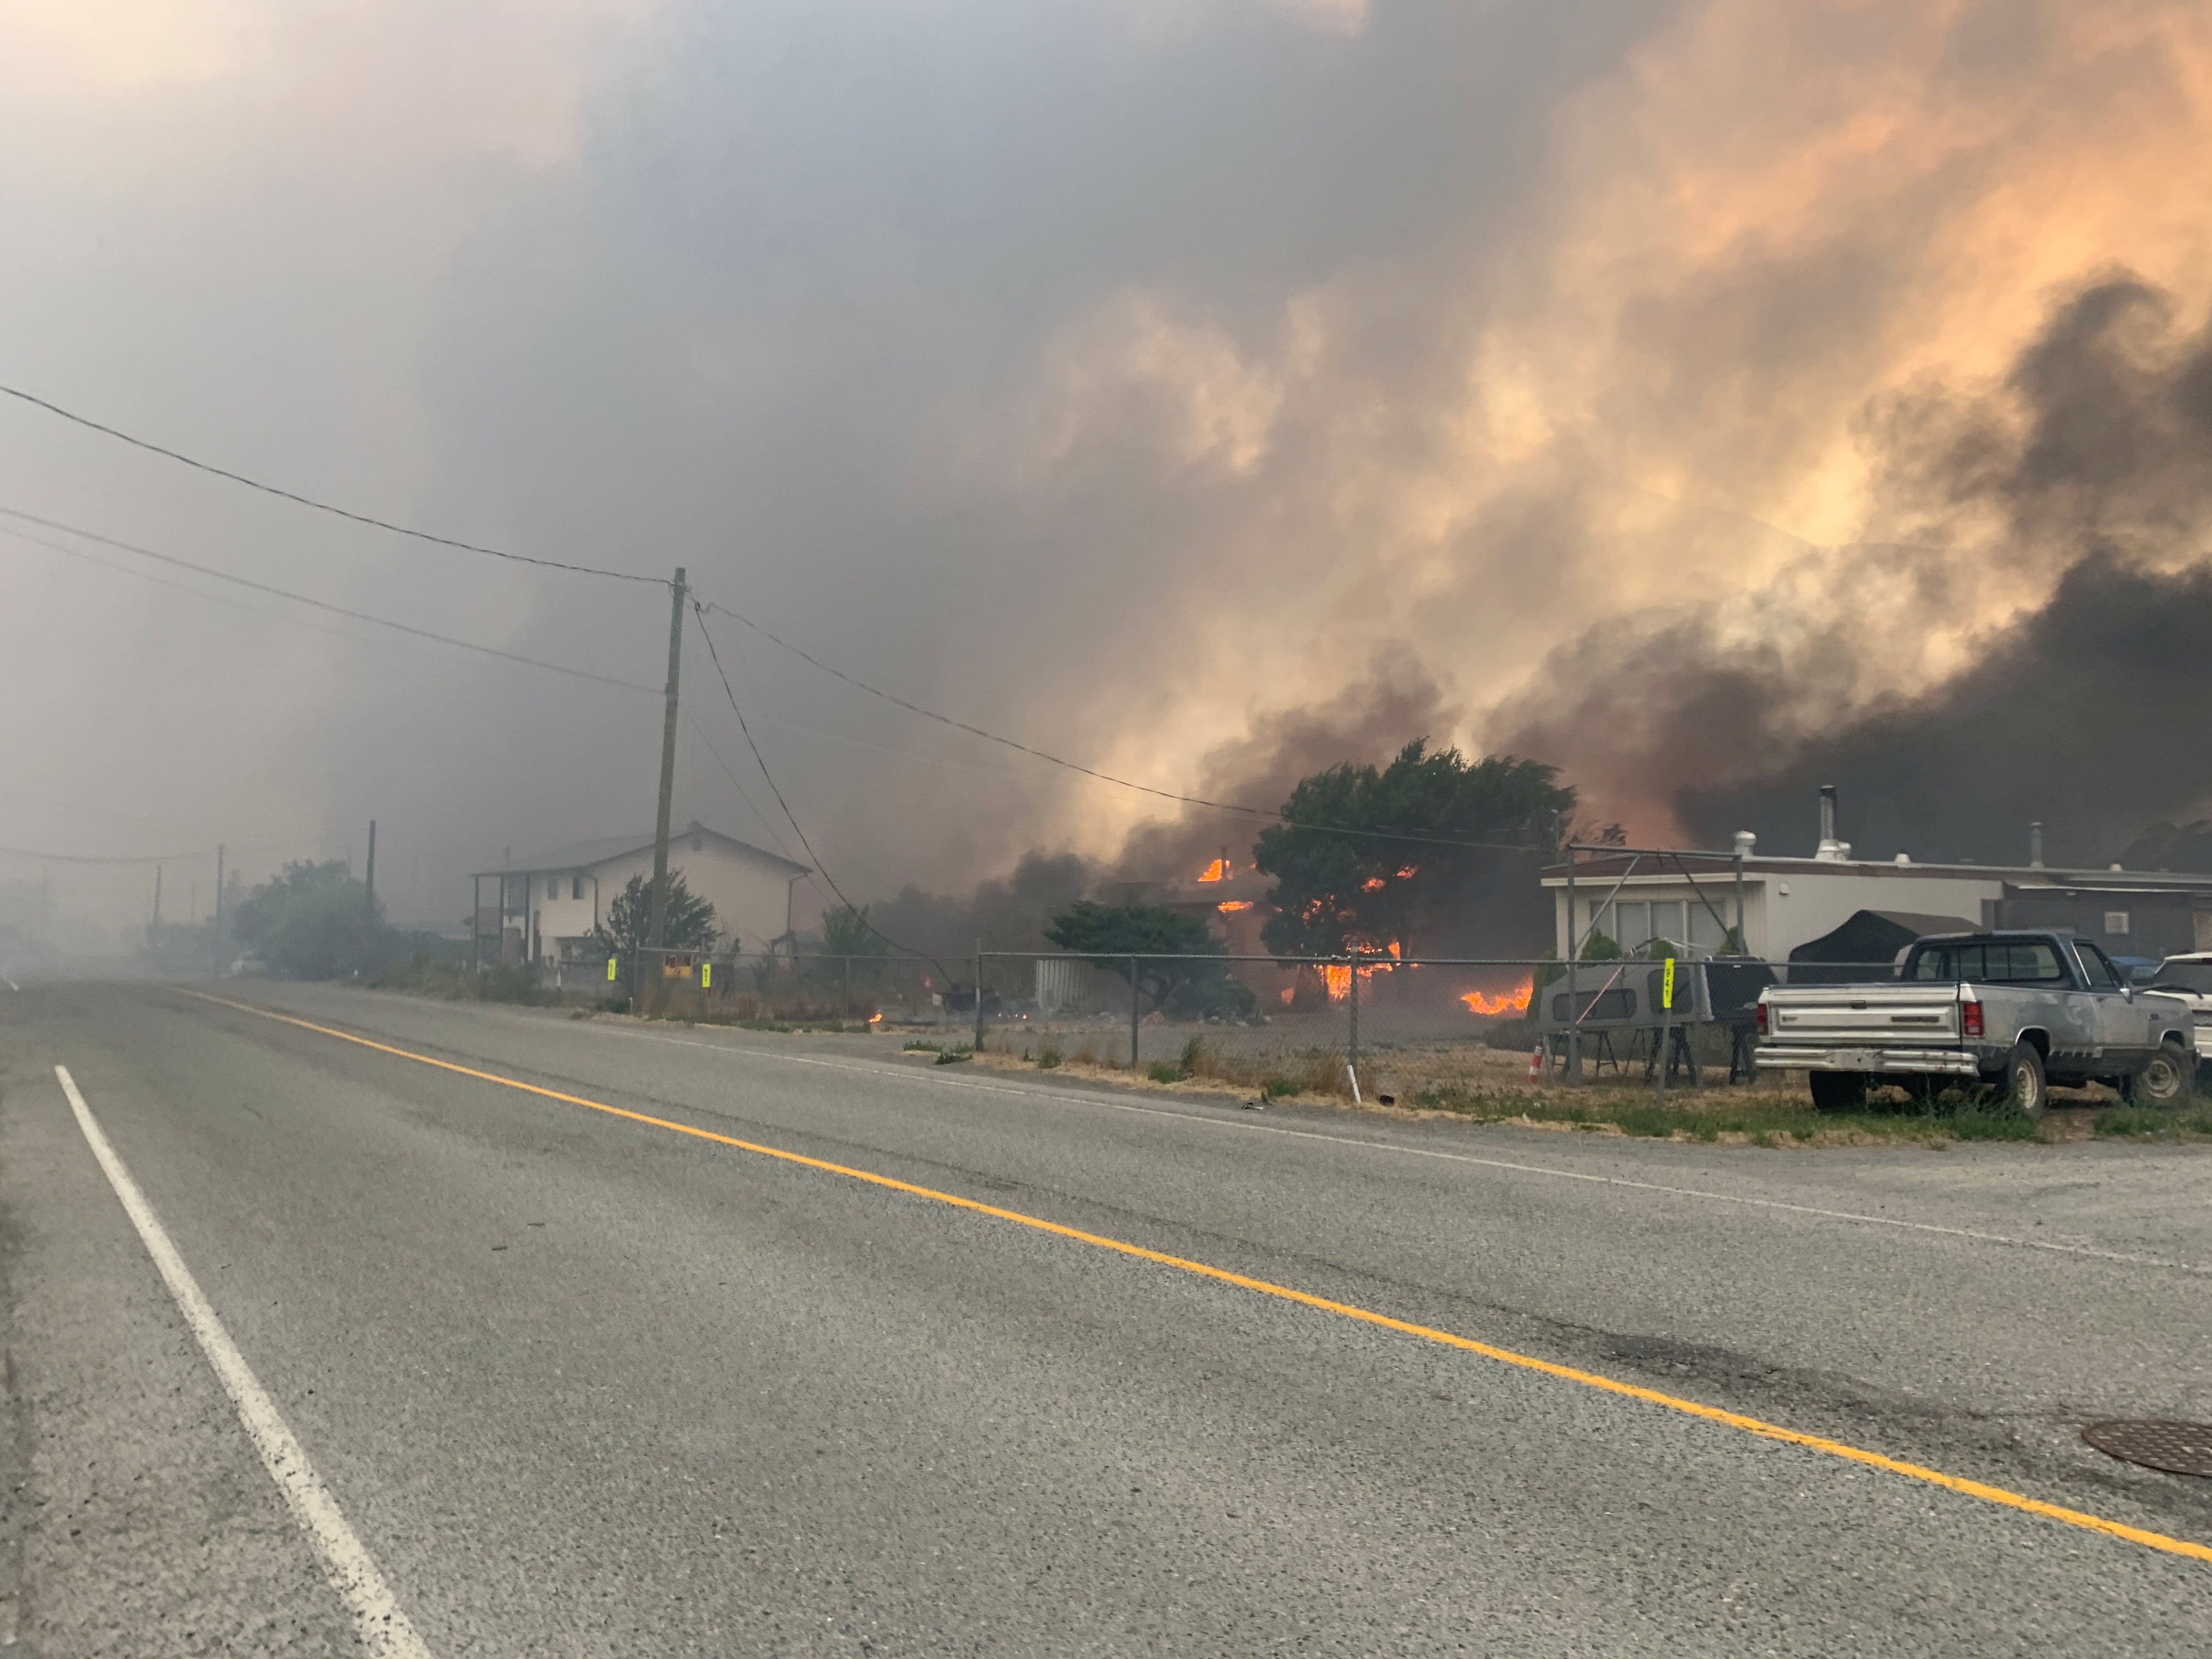 Smoke rises above the small western Canadian town of Lytton after wildfires forced its residents to evacuate, in Lytton, British Columbia, Canada 30, 2021.